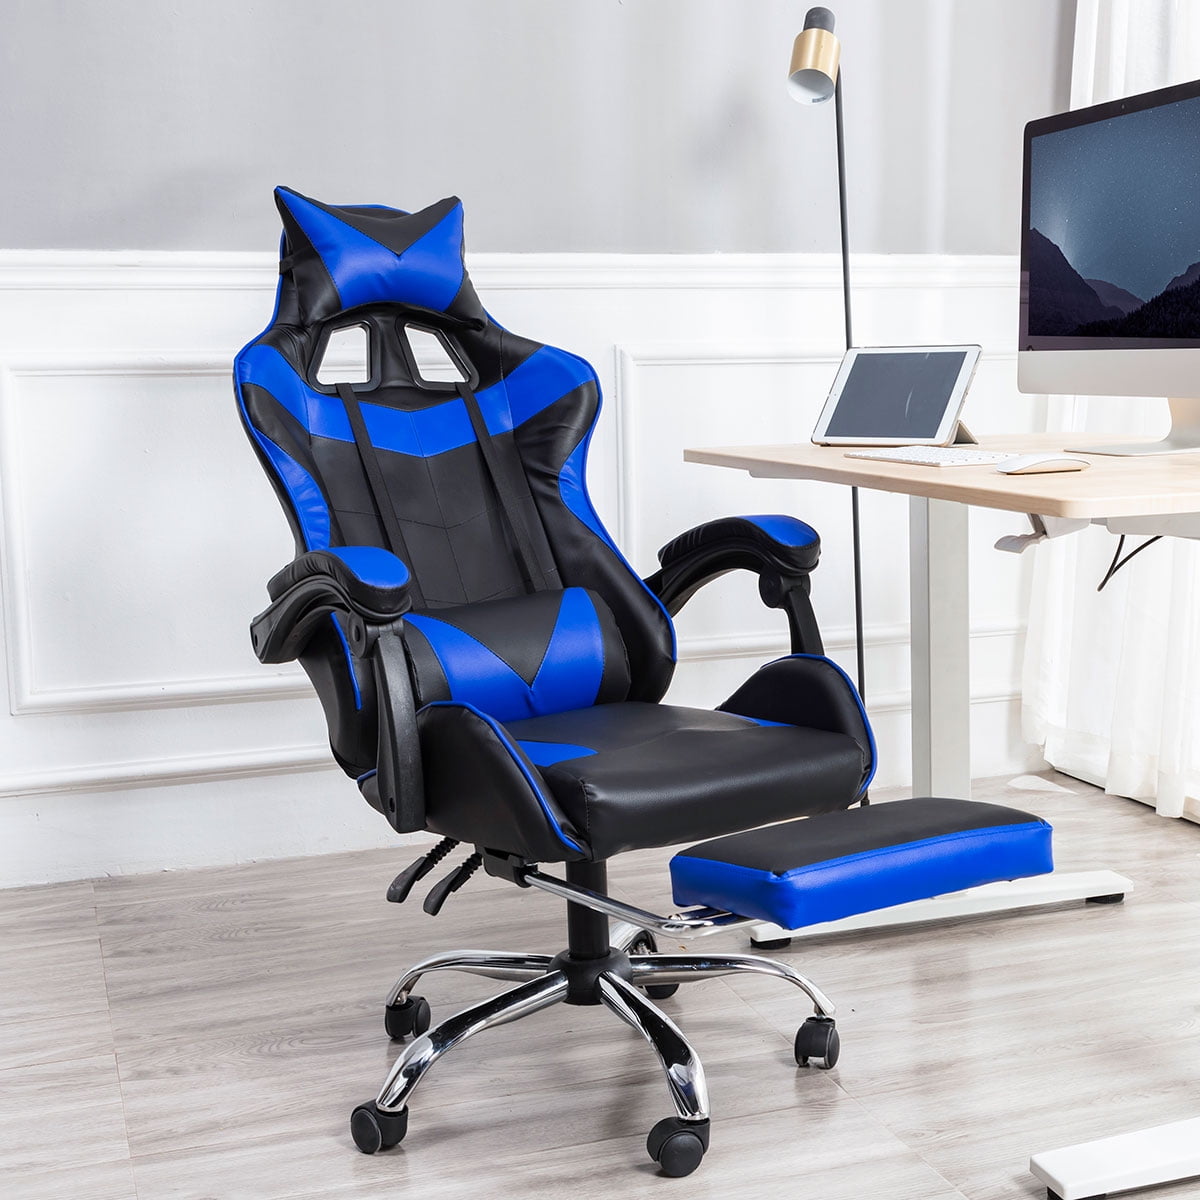 Blue Racing Style Gaming Chair - Ergonomic E-Sports ...